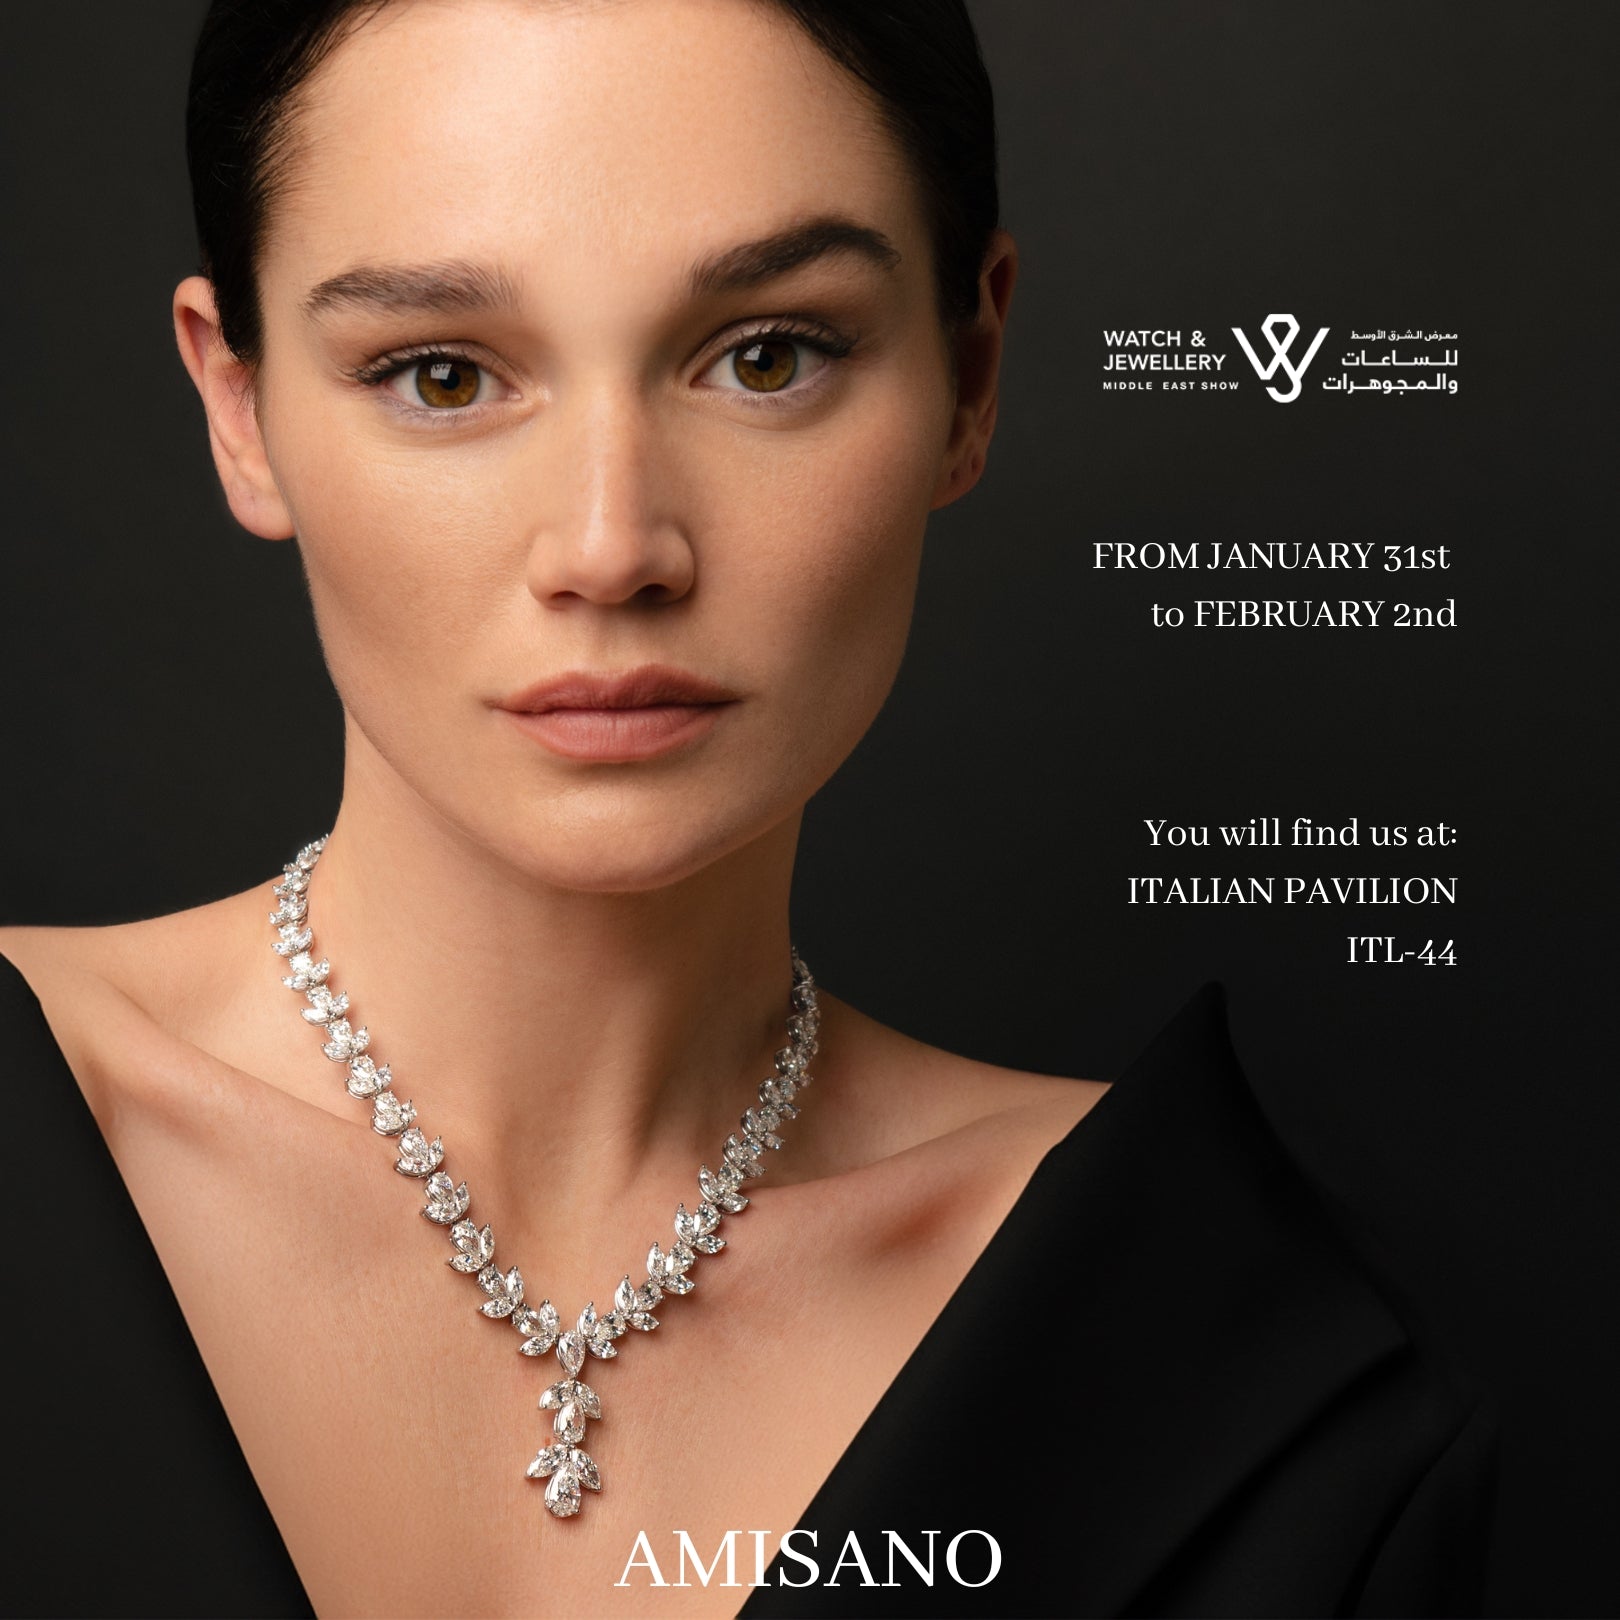 Amisano Jewelry at Sharjah Watch & Jewellery Middle East Show 2024